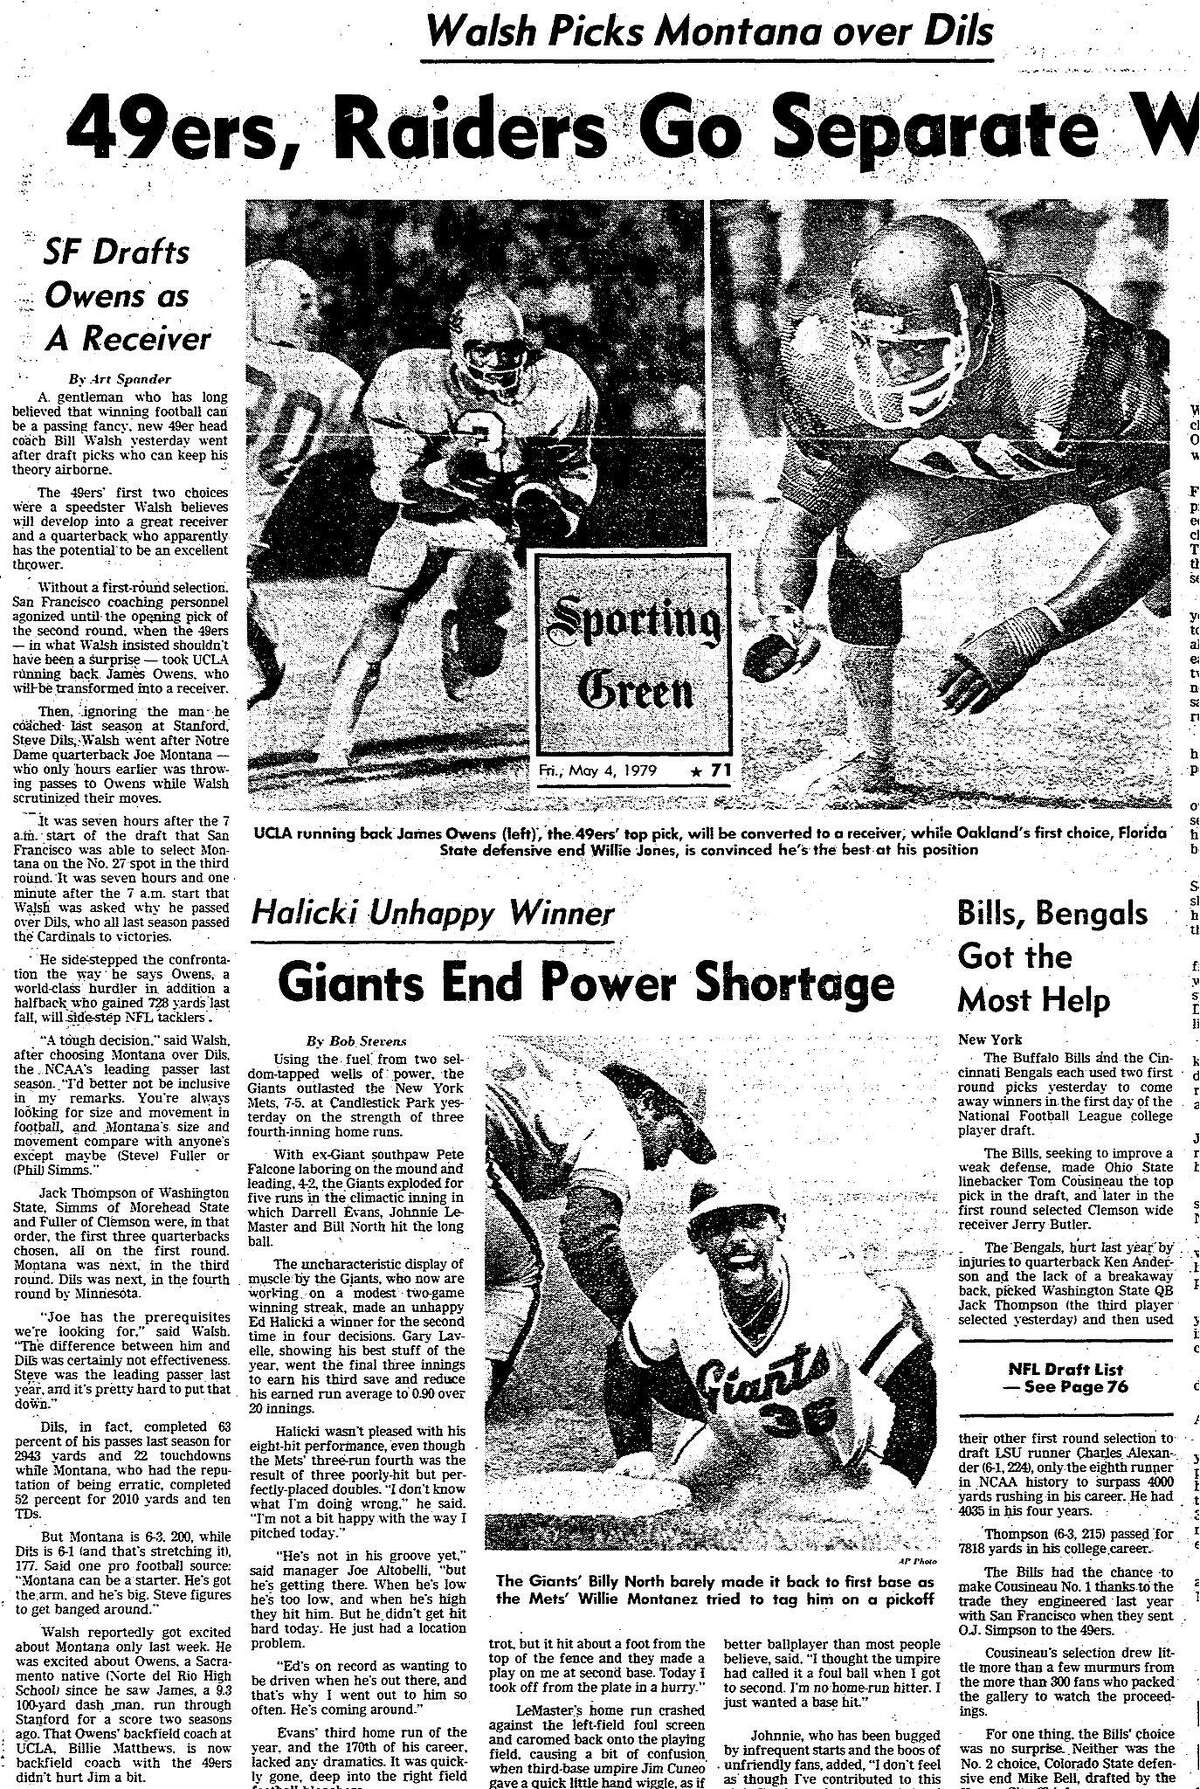 The May 4, 1979 Chronicle Sports section reports on the 49ers taking Joe Montana over Stanford's Steve Dils in the third round of the draft